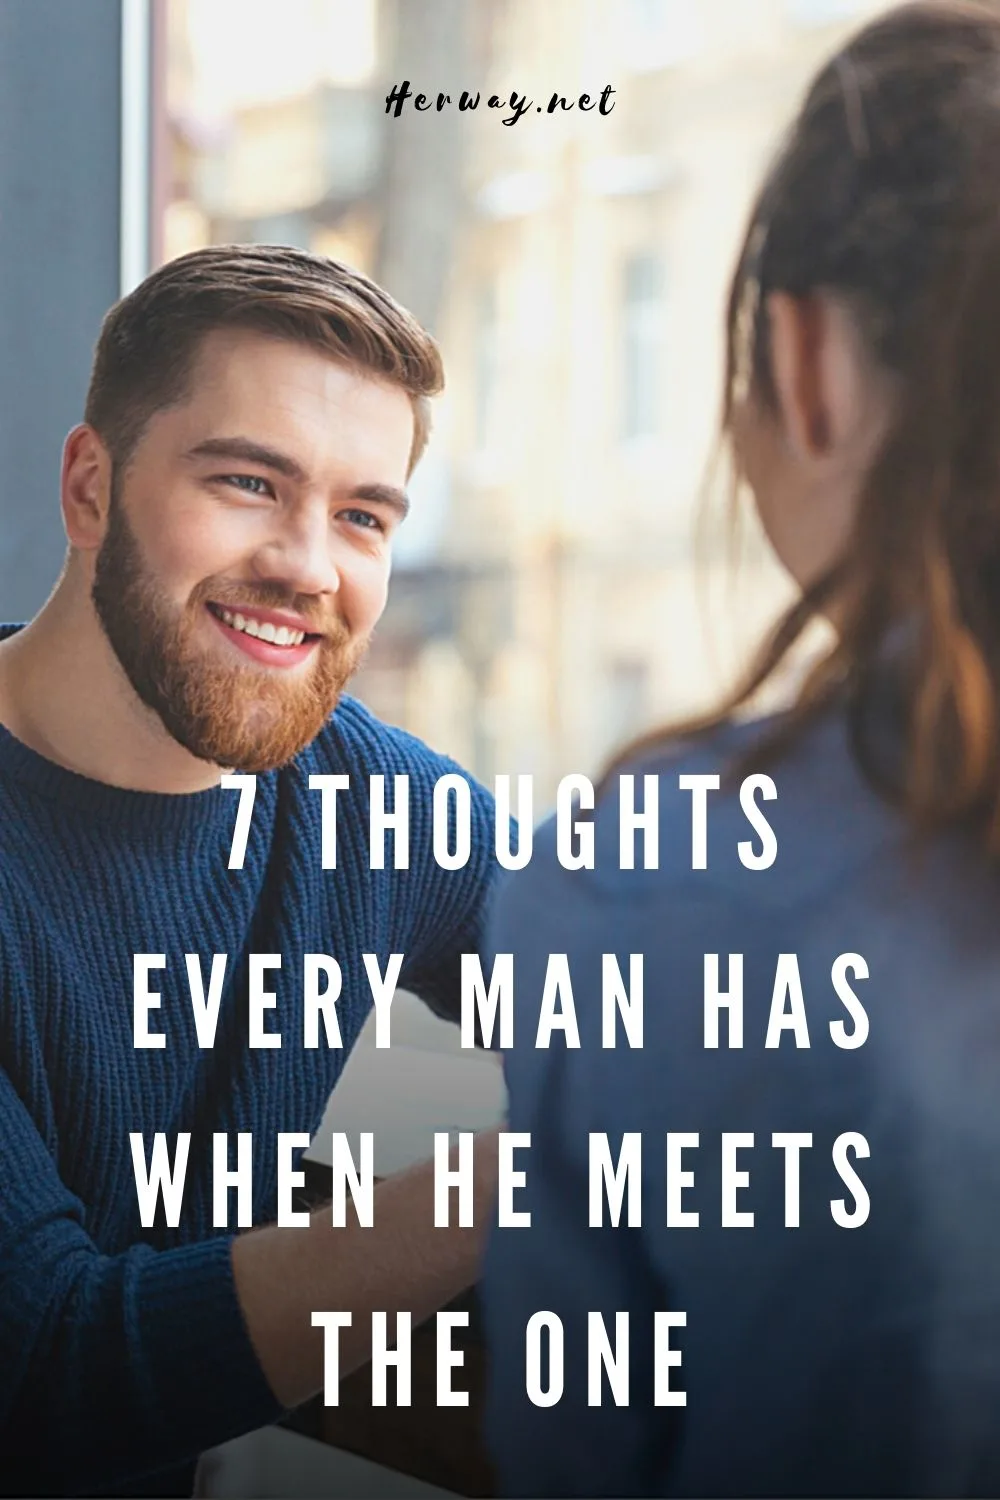 7 Thoughts Every Man Has When He Meets The One